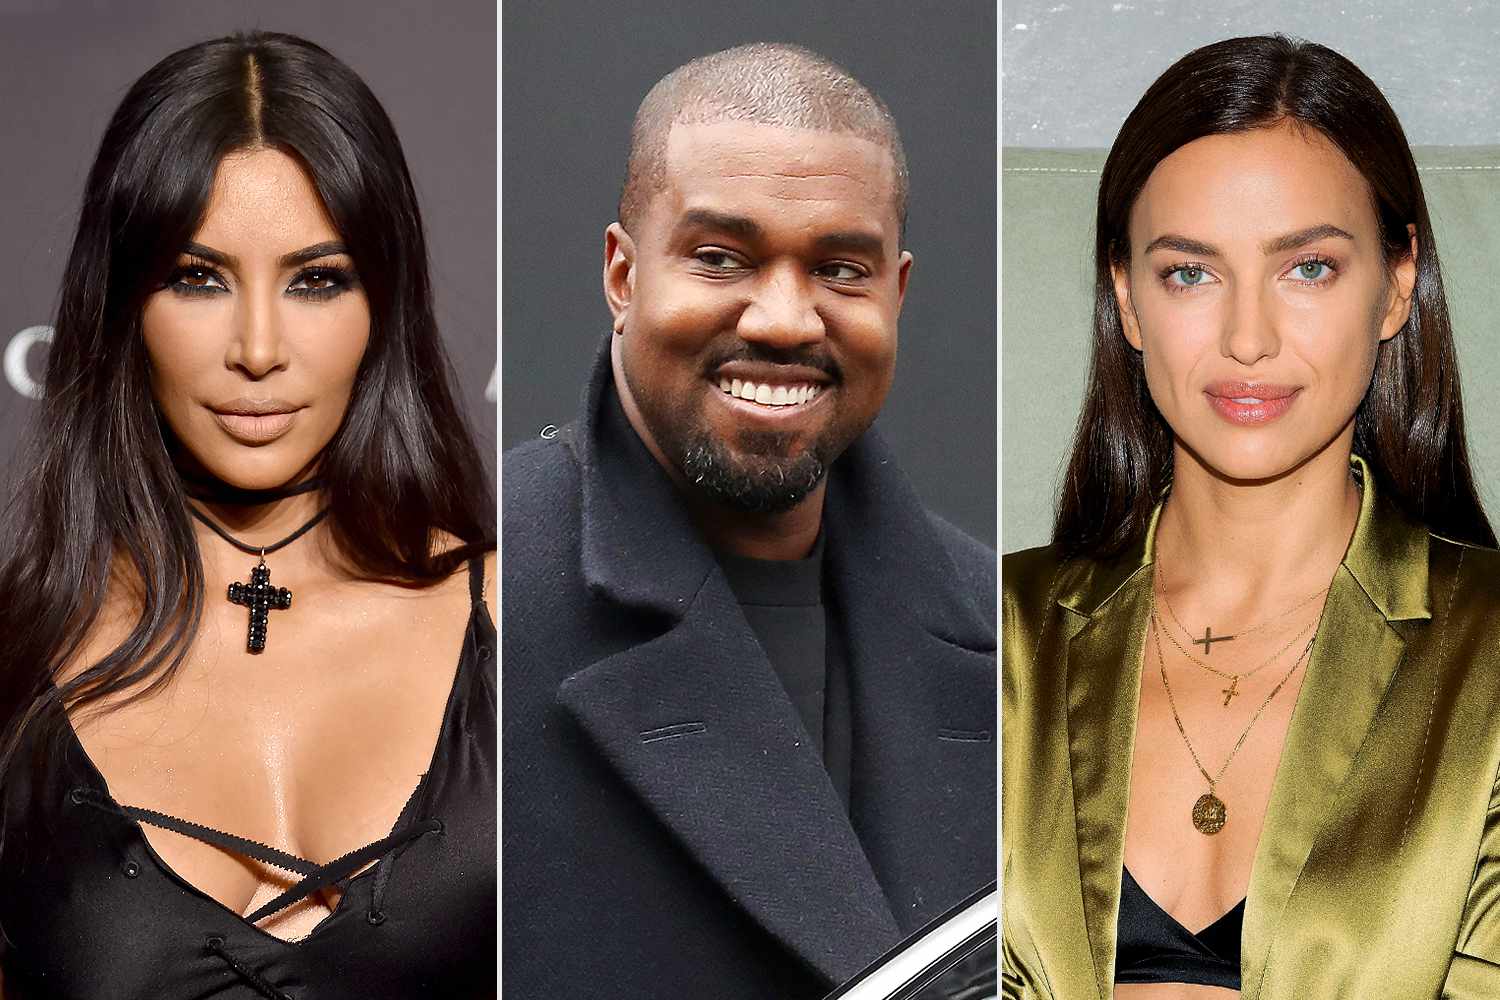 Kim Kardashian Has Known About Kanye West's Relationship with Irina Shayk for 'Weeks,' Source Says - Yahoo Entertainment